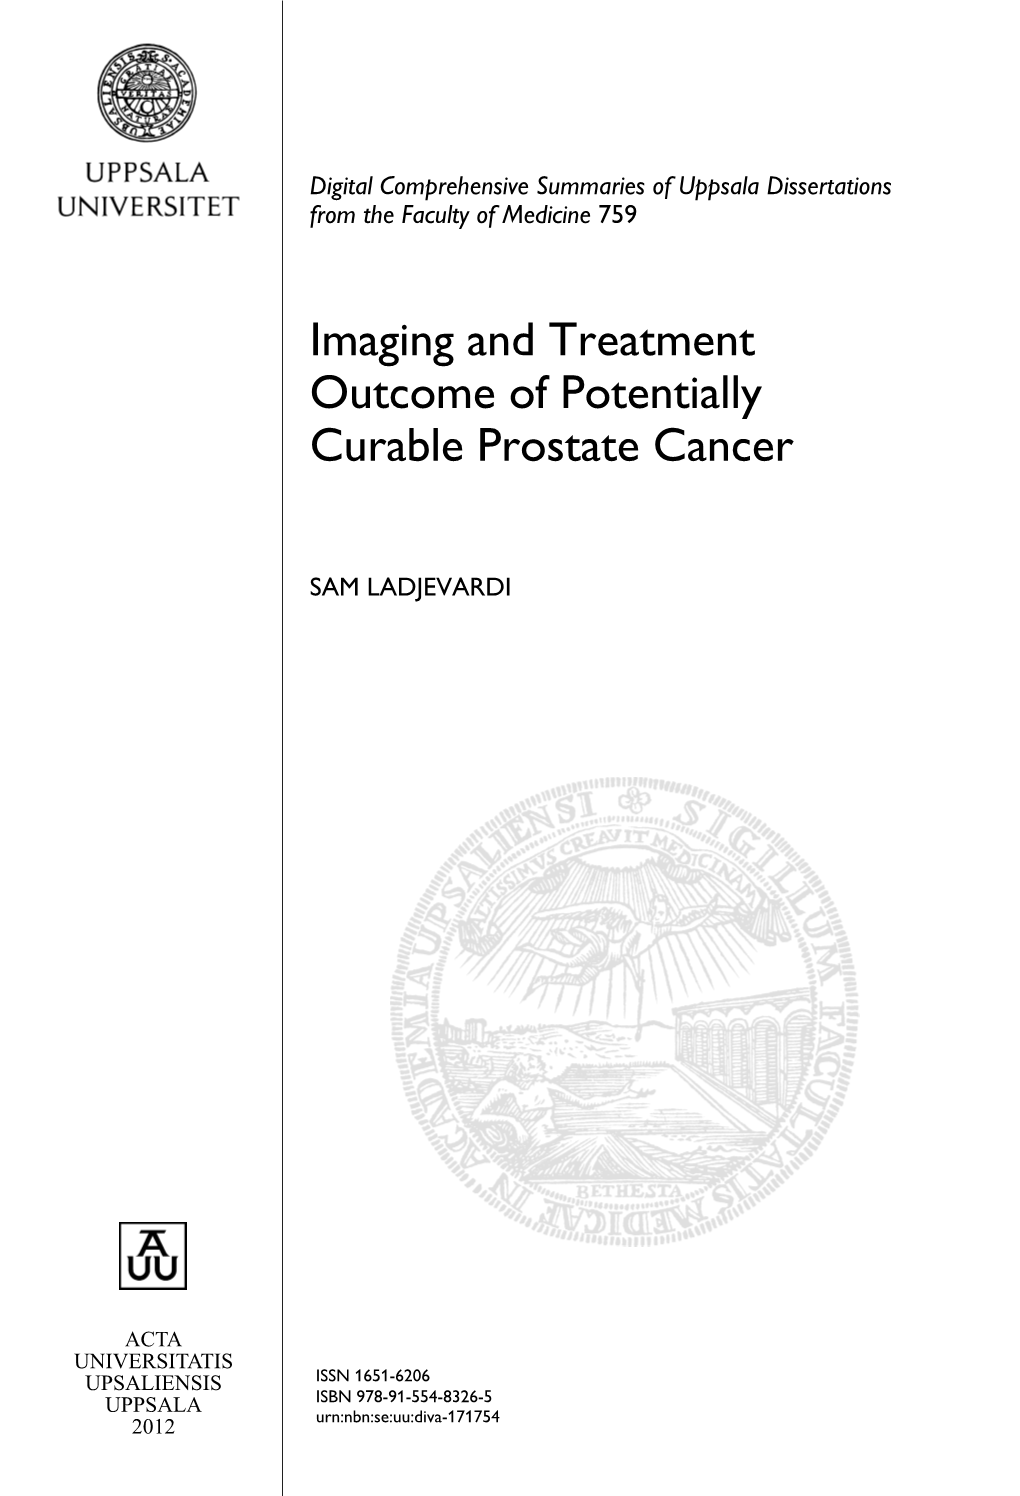 Imaging and Treatment Outcome of Potentially Curable Prostate Cancer